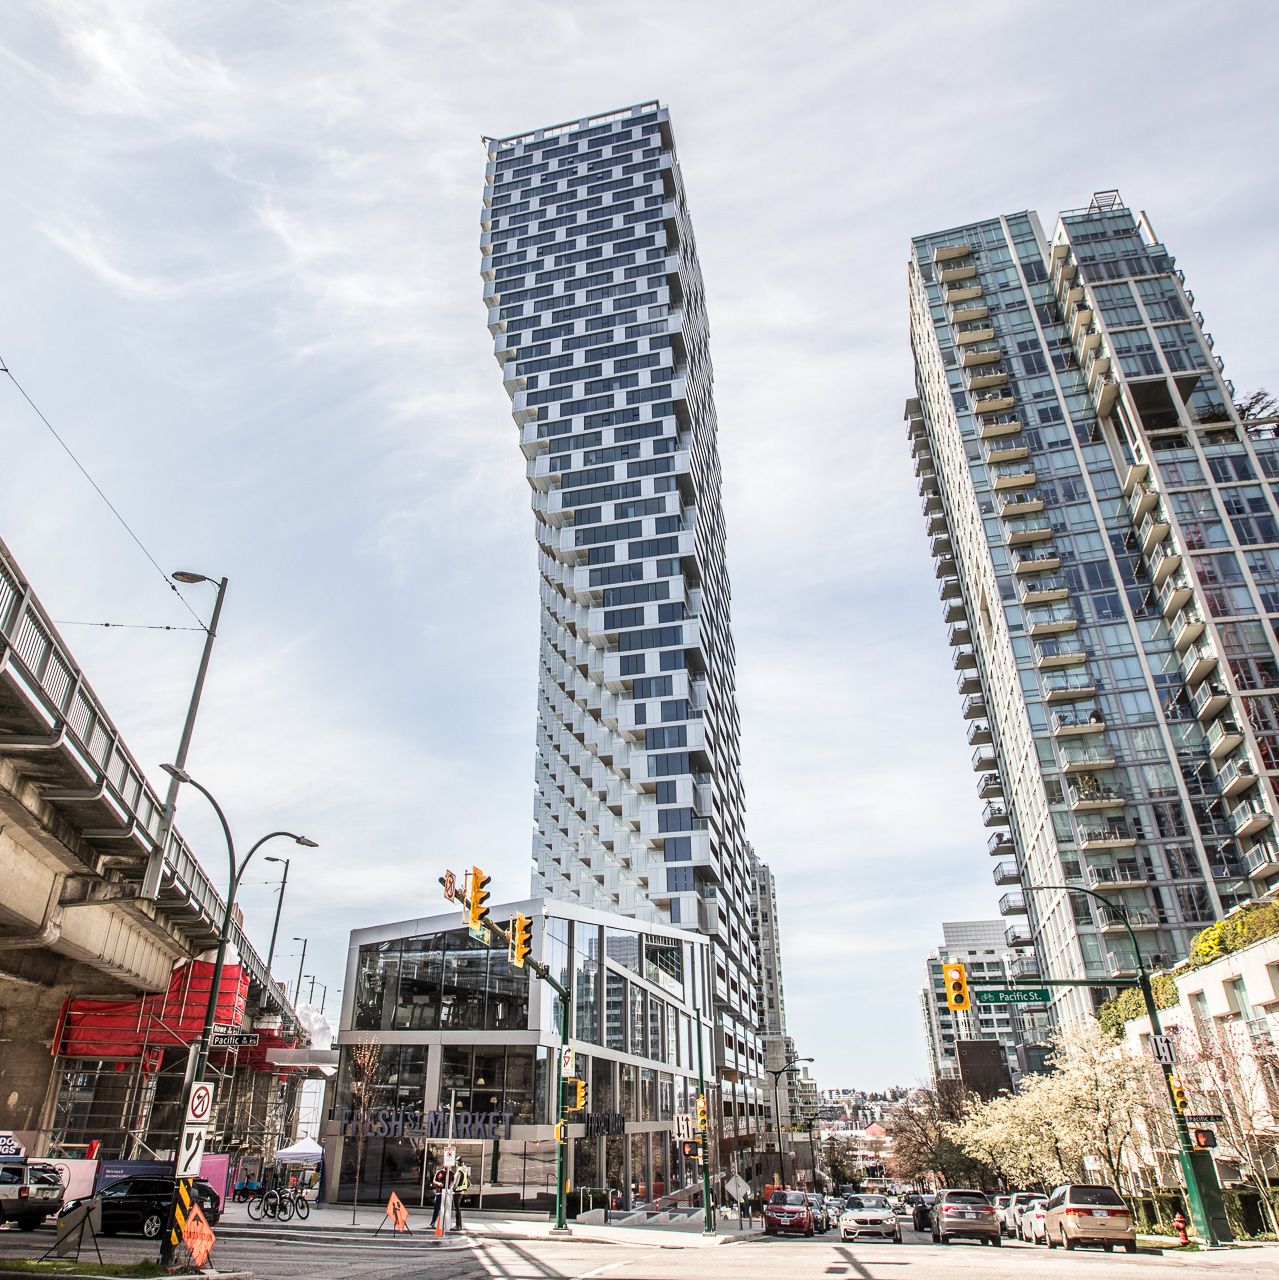 Main Photo: 4505-1480 HOWE ST in VANCOUVER: Yaletown Condo for sale (Vancouver West)  : MLS®# R2612302